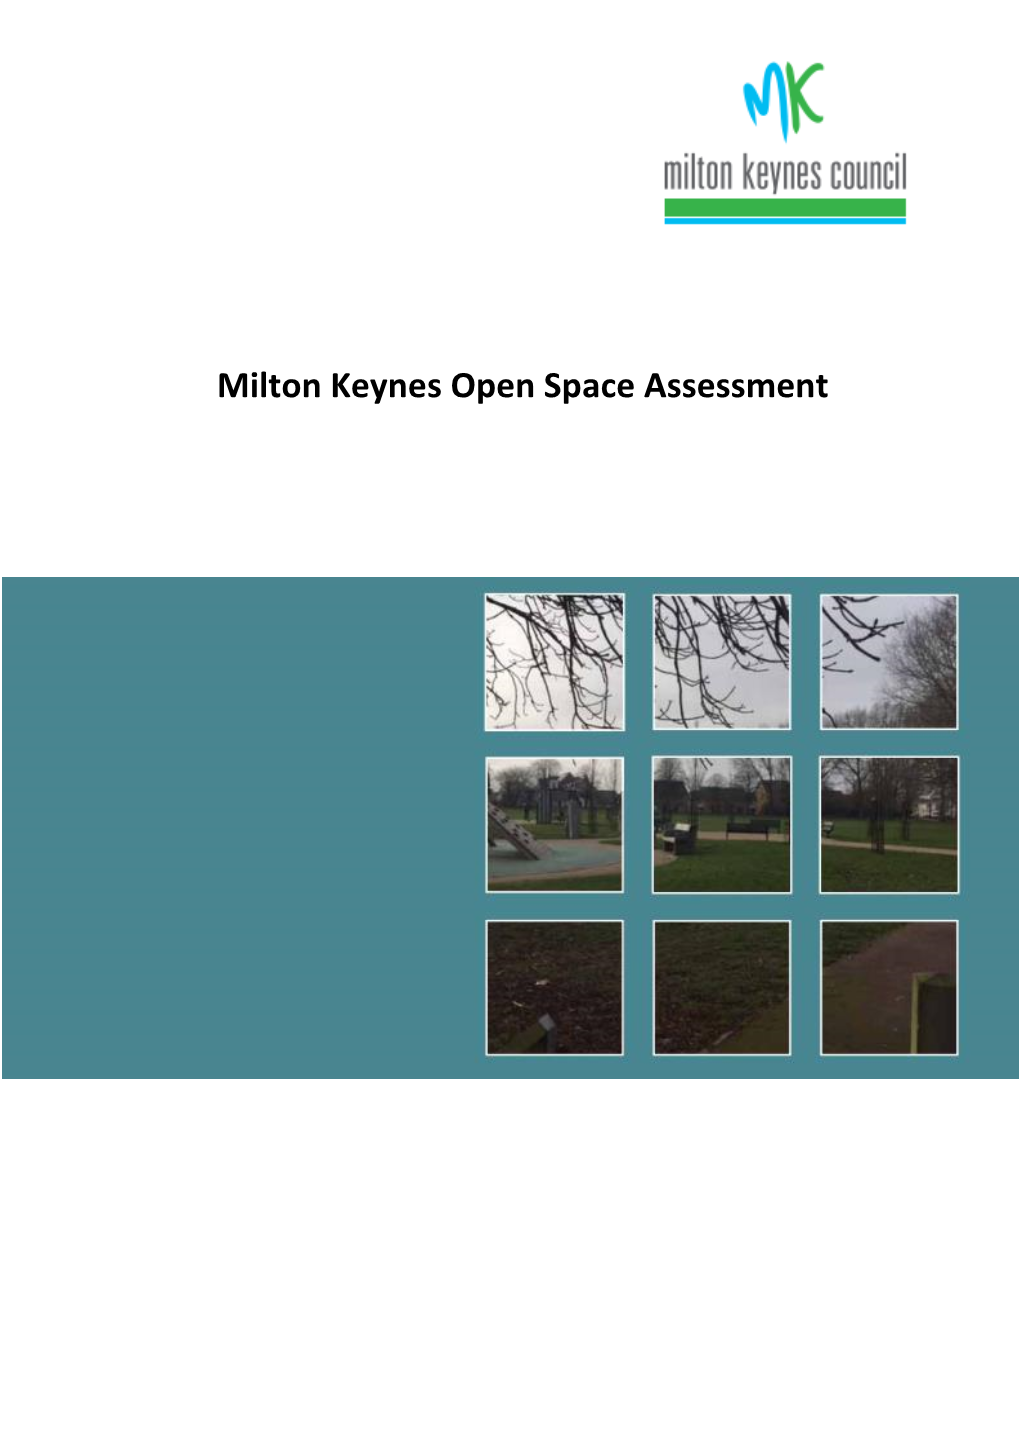 MK Open Space Assessment